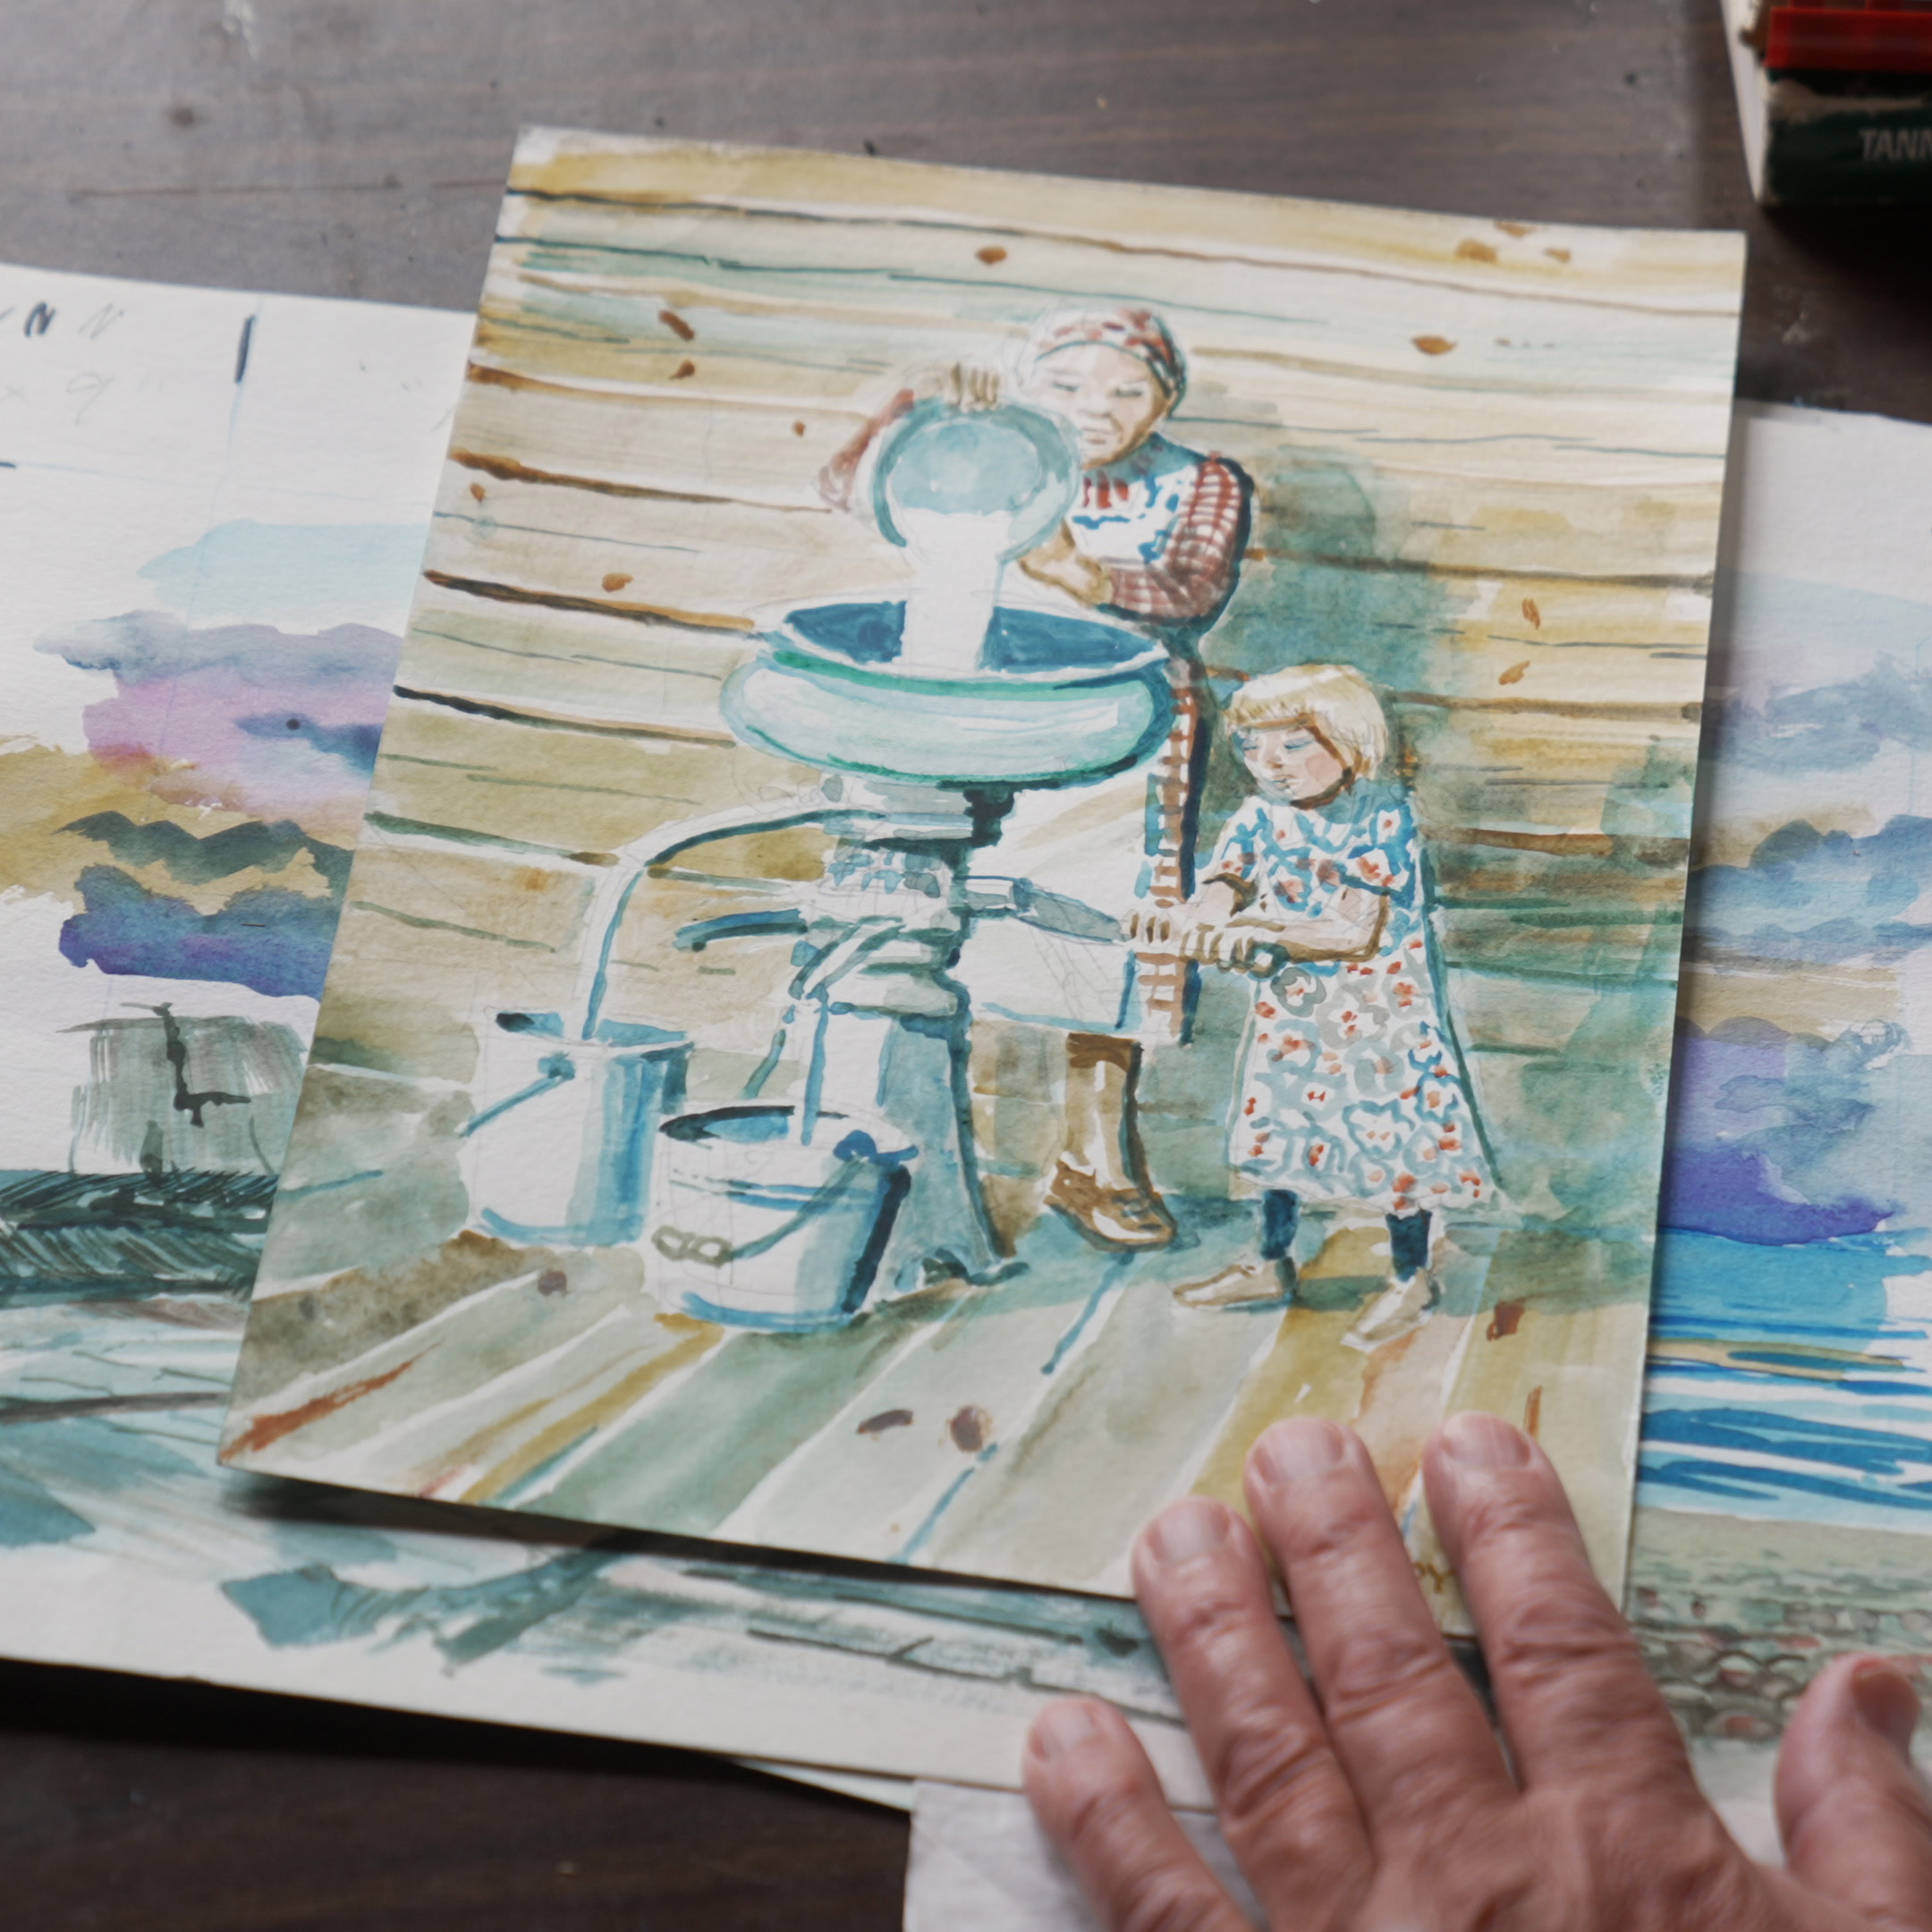 Gawboy shows artwork that highlights activities he’d seen growing up in Northern Minnesota. The image show shows a woman and a young girl pouring liquid into a container. 